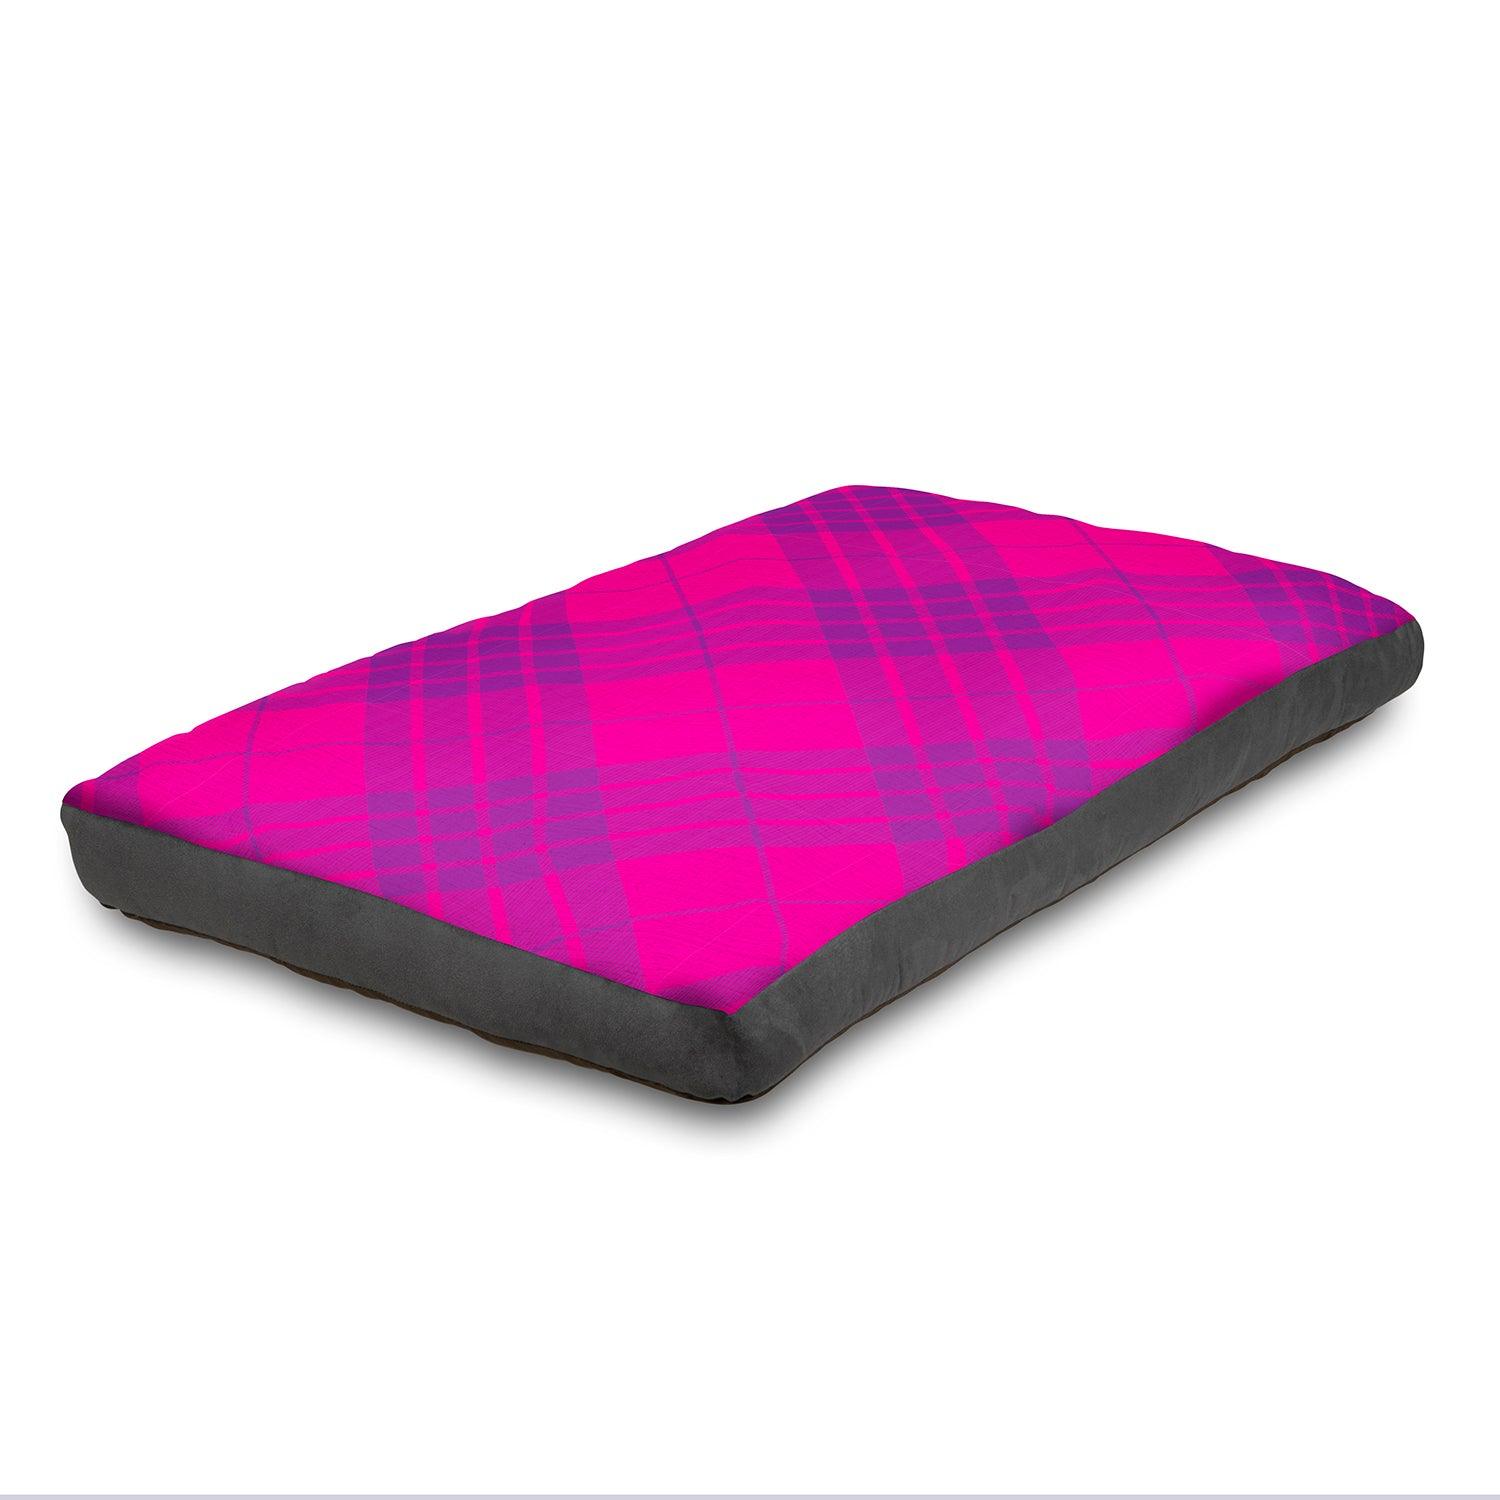 View Super Comfy Dog Bed Soft and Fluffy with Washable Cover Large 125 cm x 85 cm Pink information